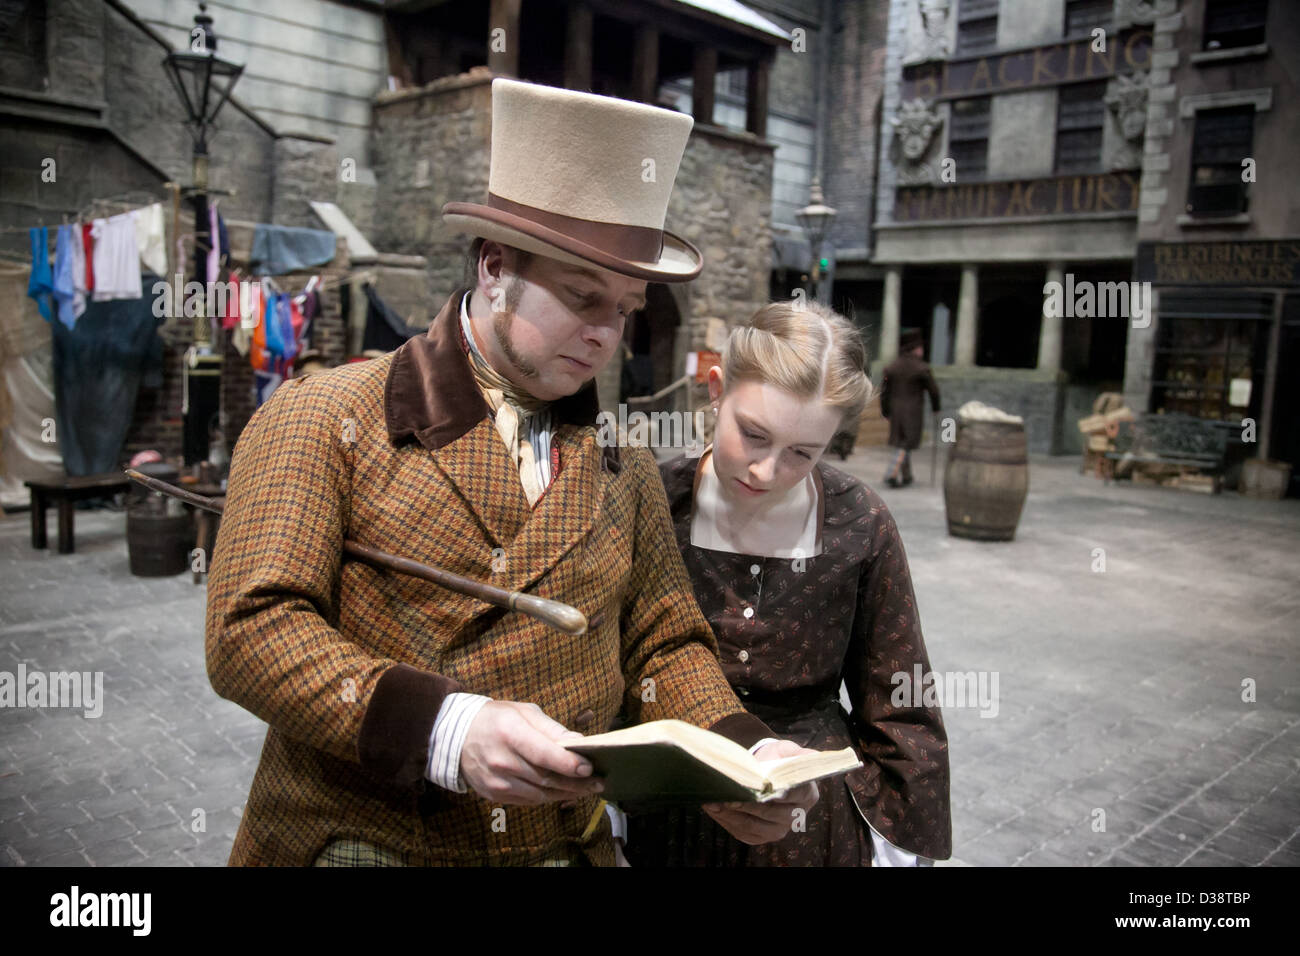 Actors portraying Victorian Dickensian characters at Dickens World in UK Stock Photo